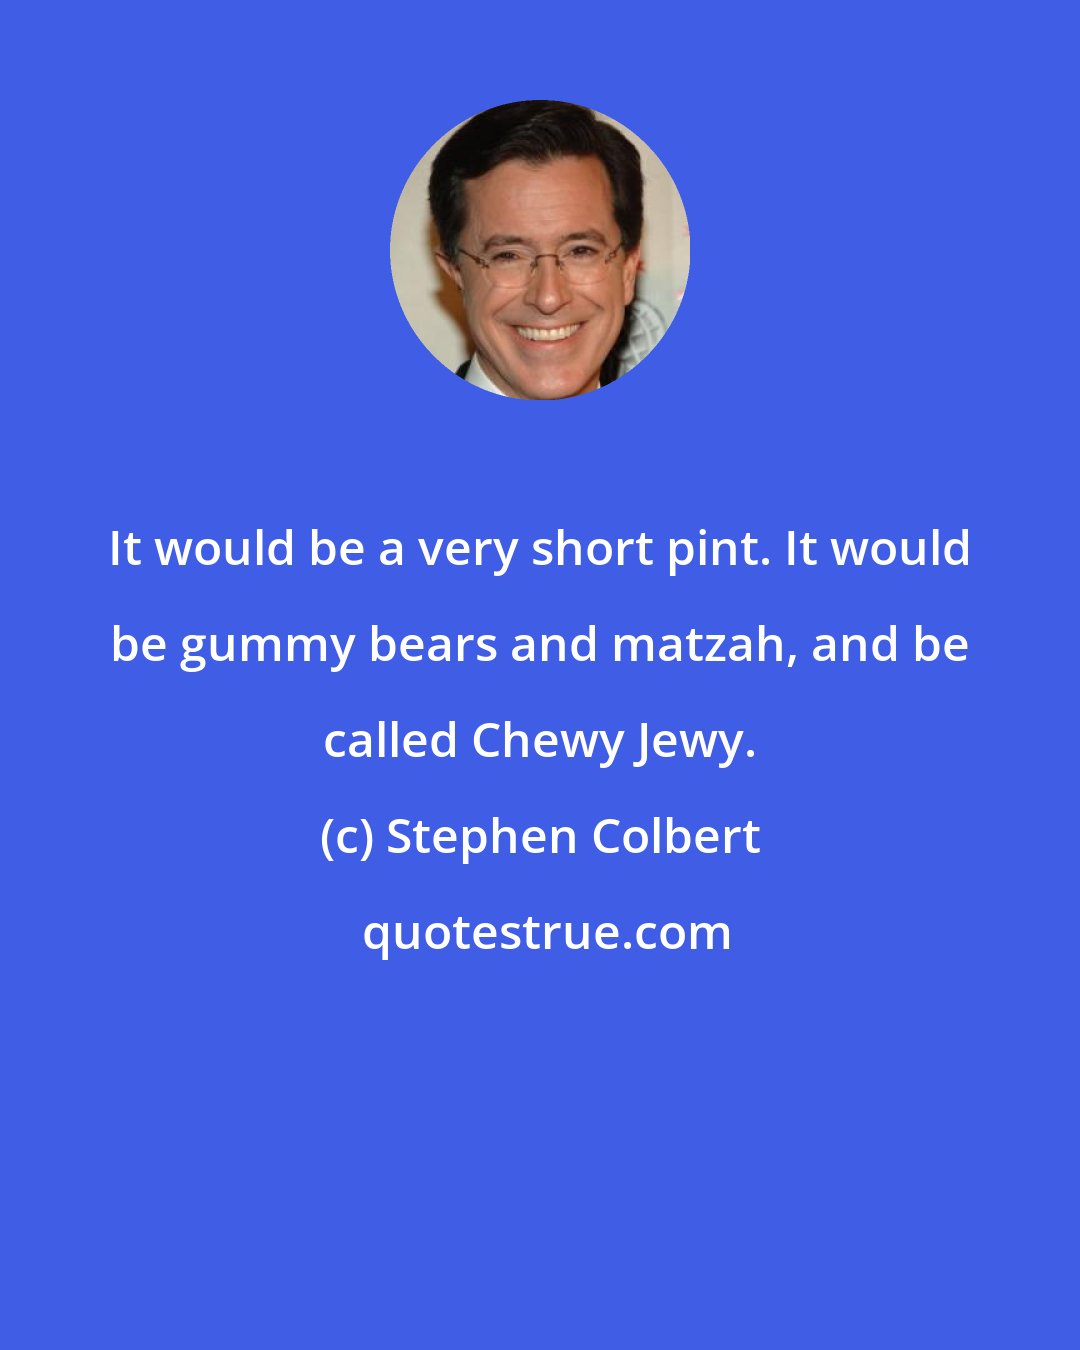 Stephen Colbert: It would be a very short pint. It would be gummy bears and matzah, and be called Chewy Jewy.